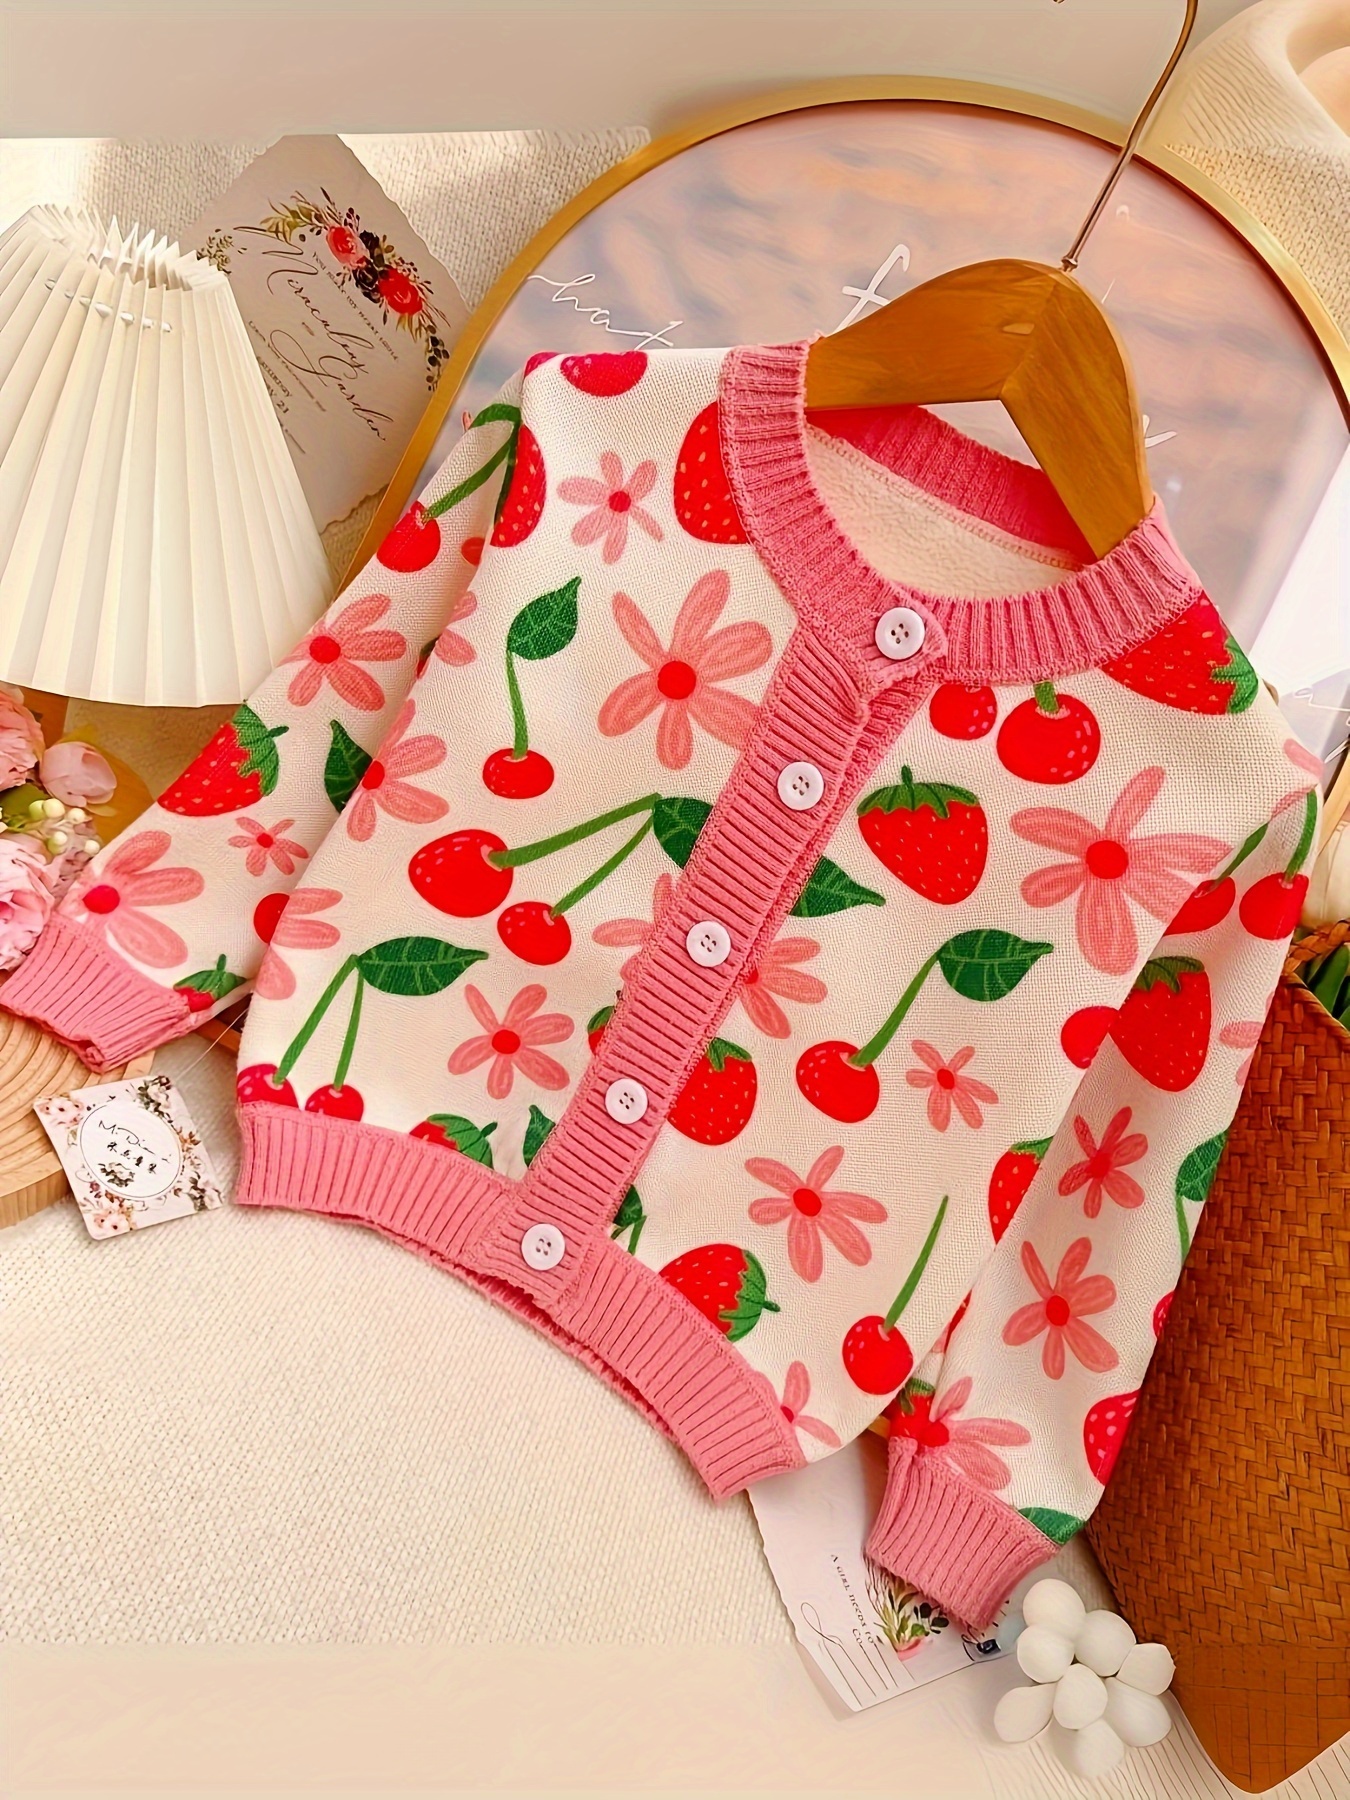 Girls Warm Knitted Flowers Strawberry Jacquard Button Down Sweater Coat,  Fall/ Winter Clothing For Teens Kids